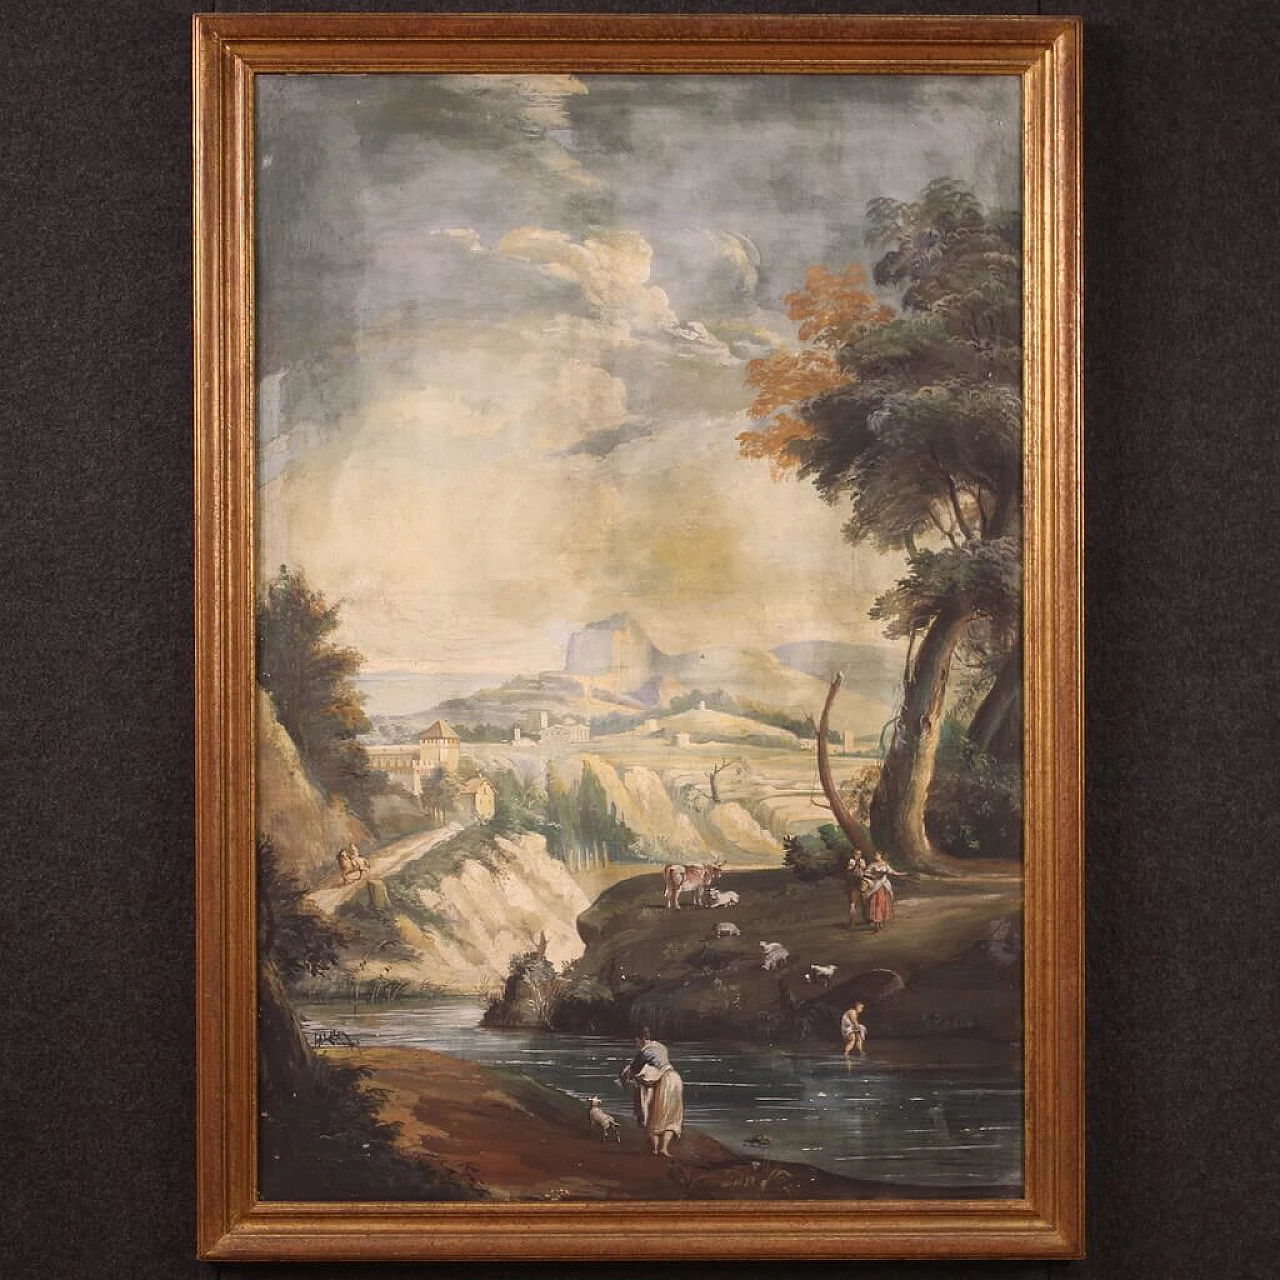 Landscape with figures, tempera painting on paper, late 18th century 2